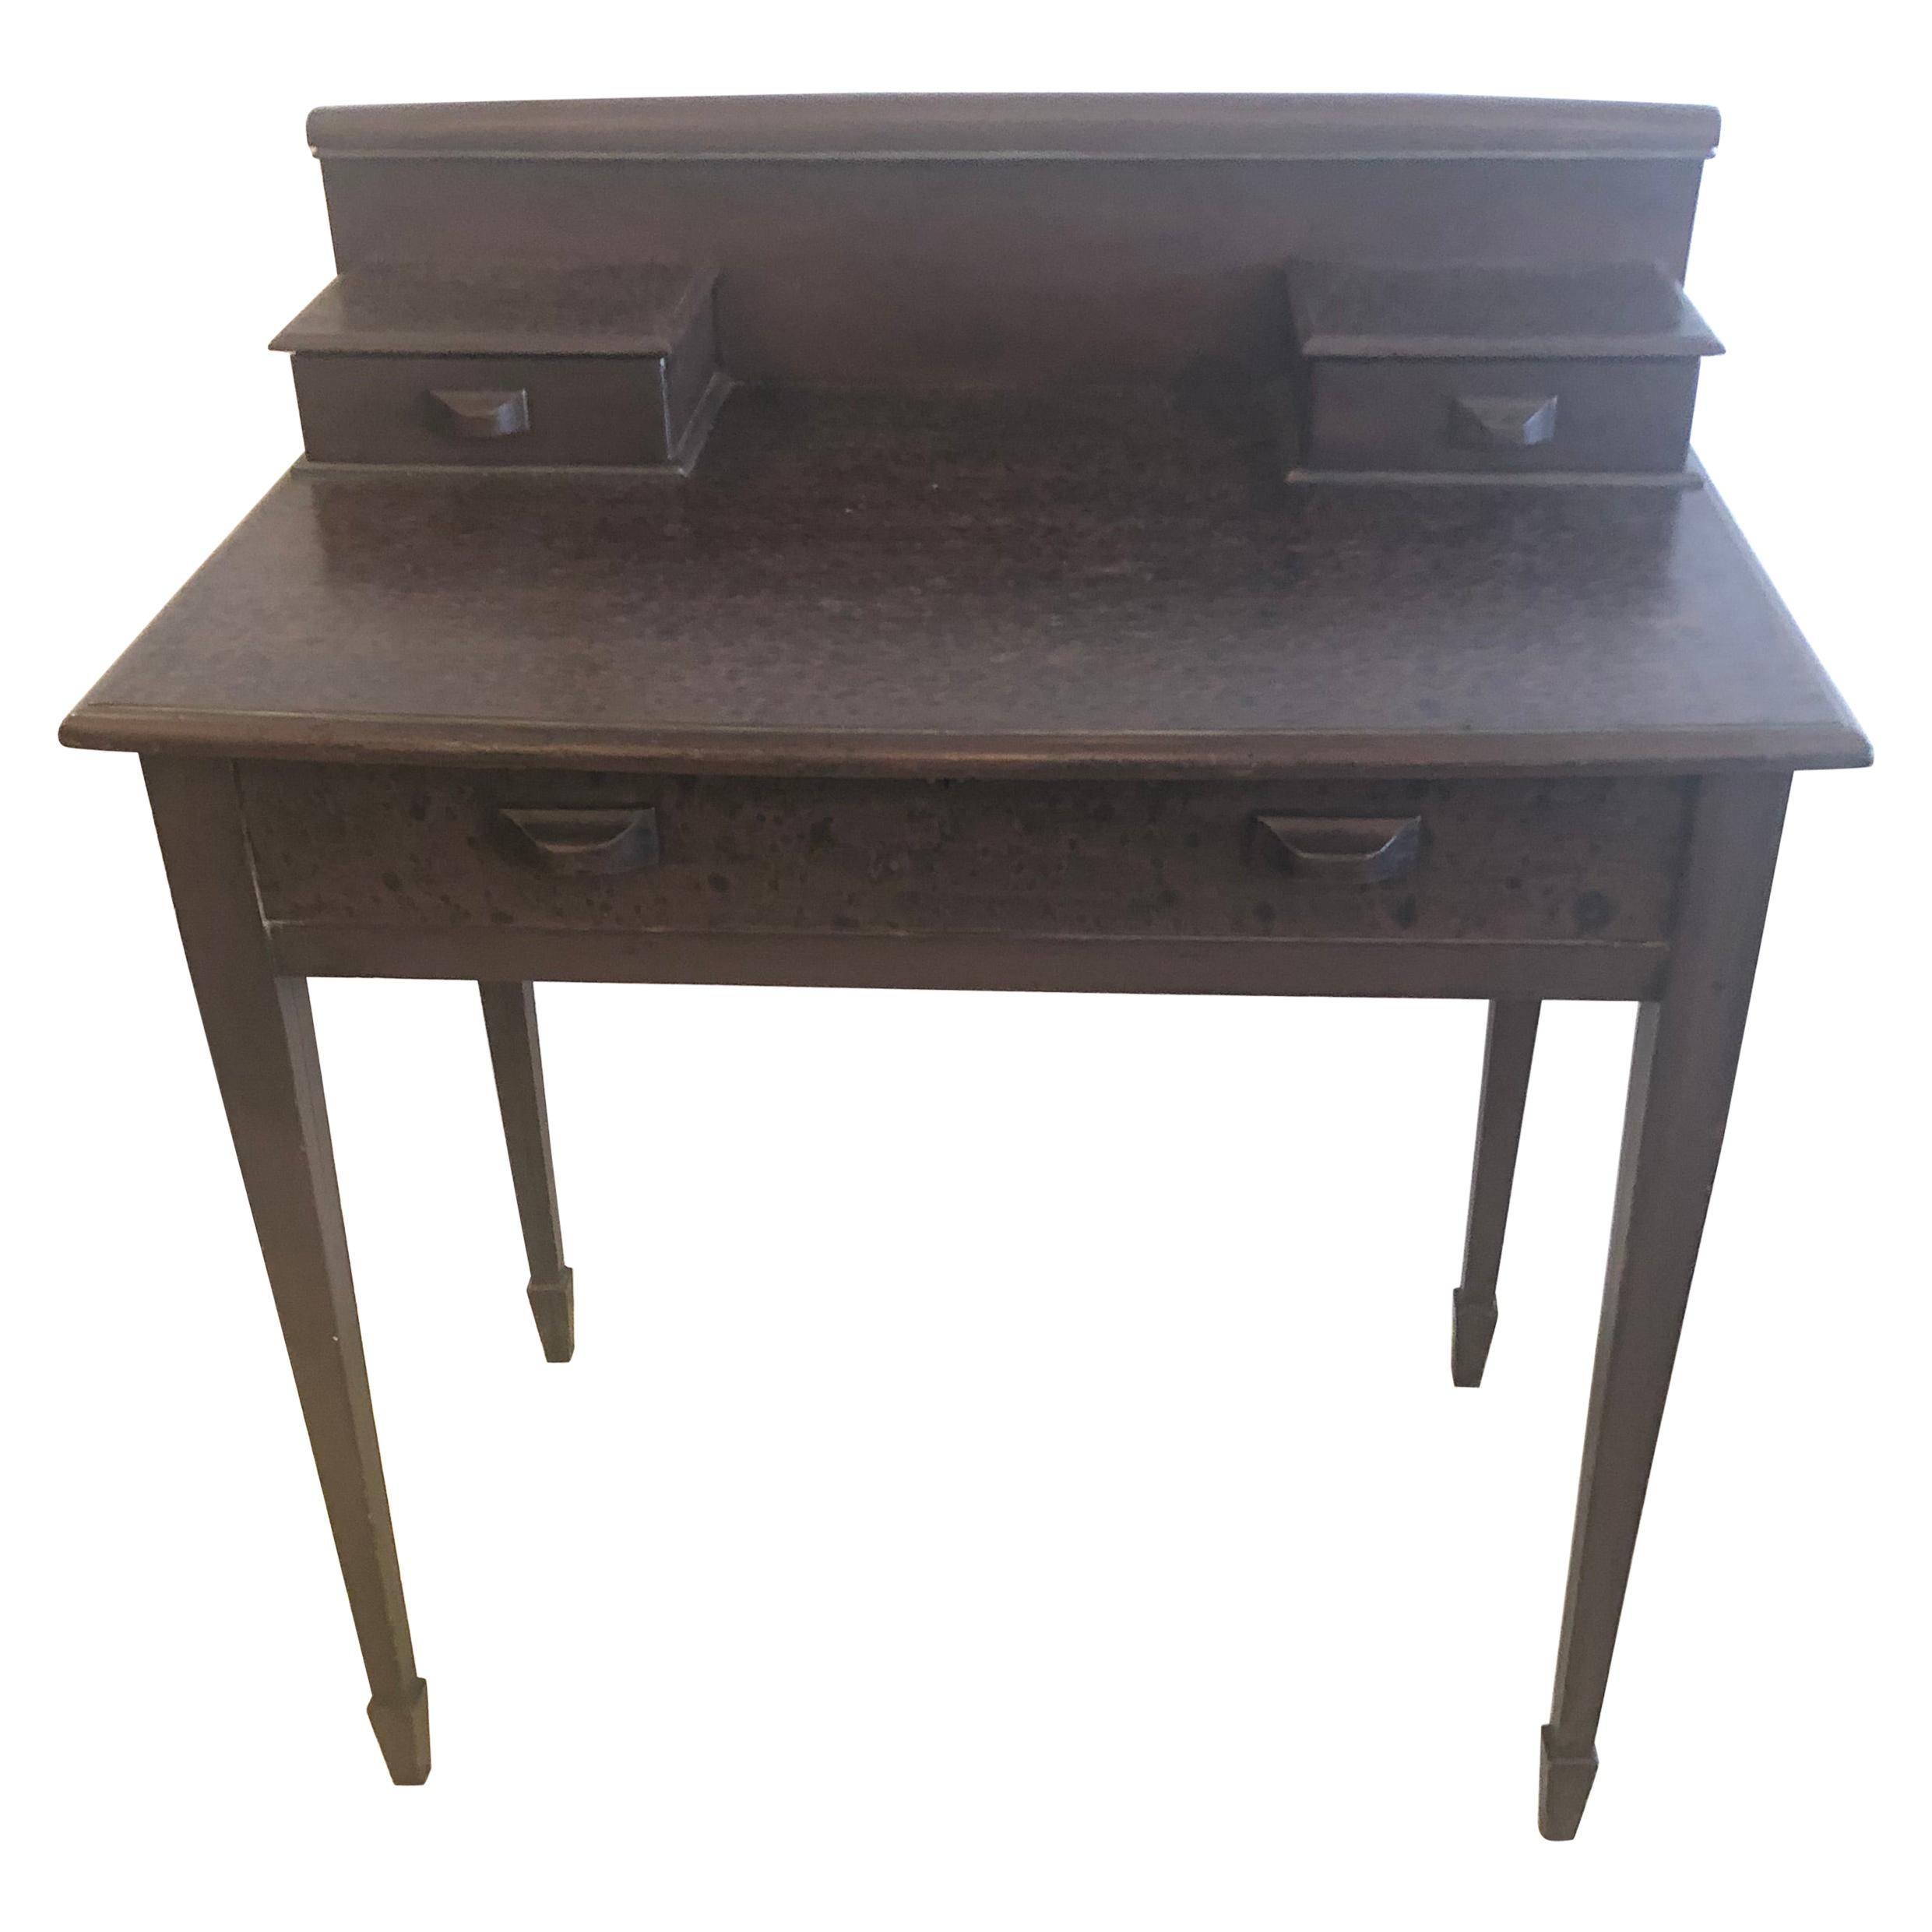 Lovely Nantucket Faux Painted Antique Writing Desk